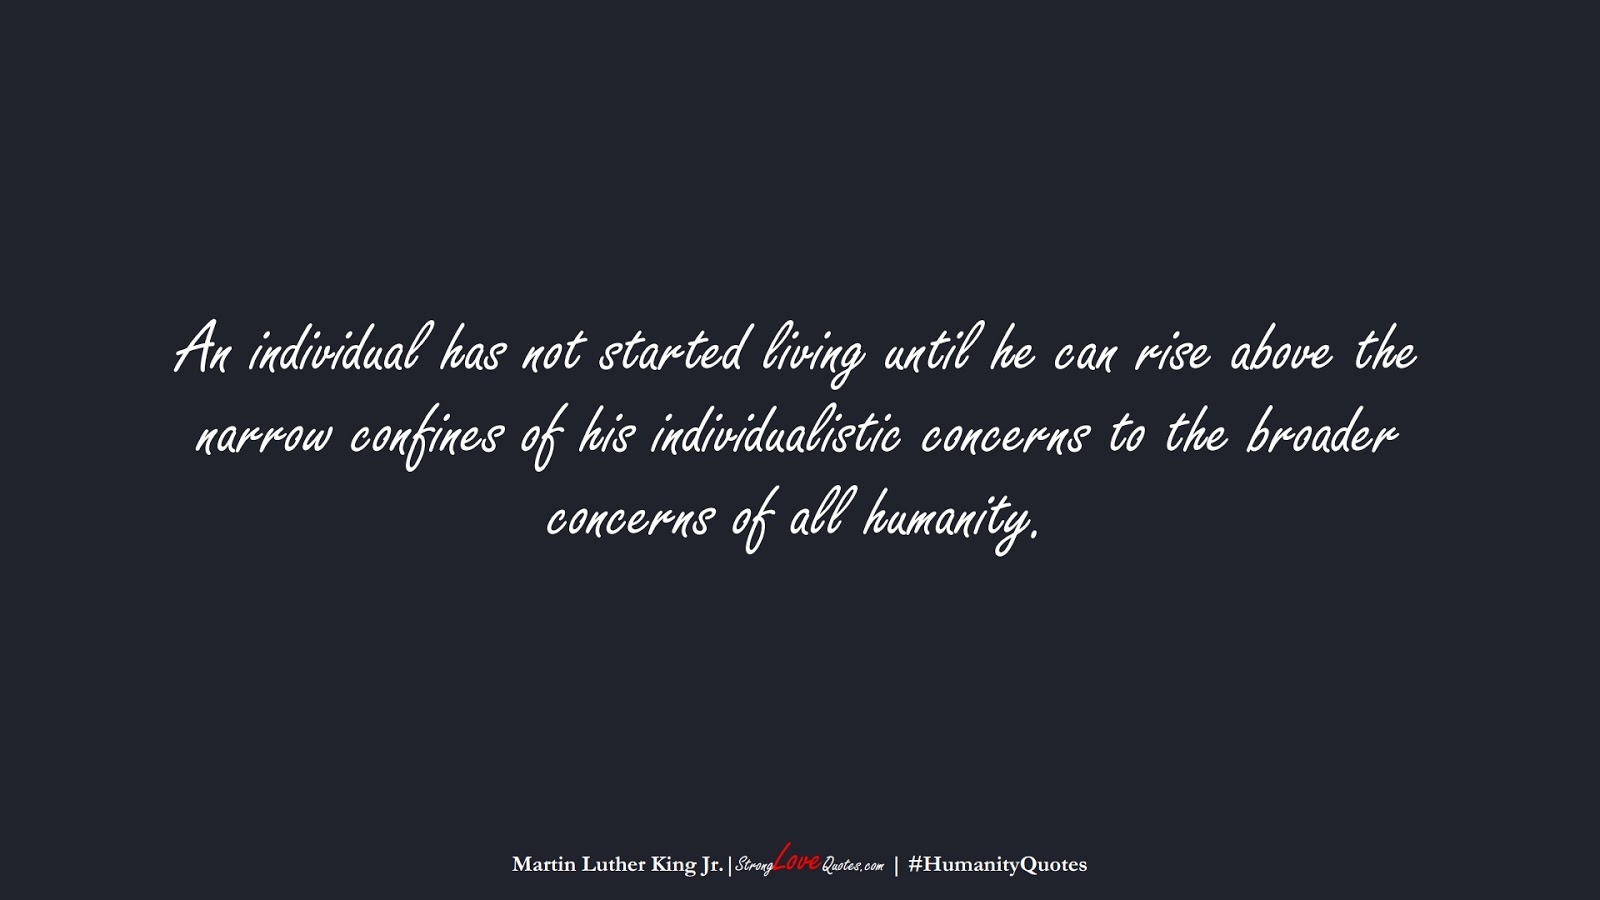 An individual has not started living until he can rise above the narrow confines of his individualistic concerns to the broader concerns of all humanity. (Martin Luther King Jr.);  #HumanityQuotes